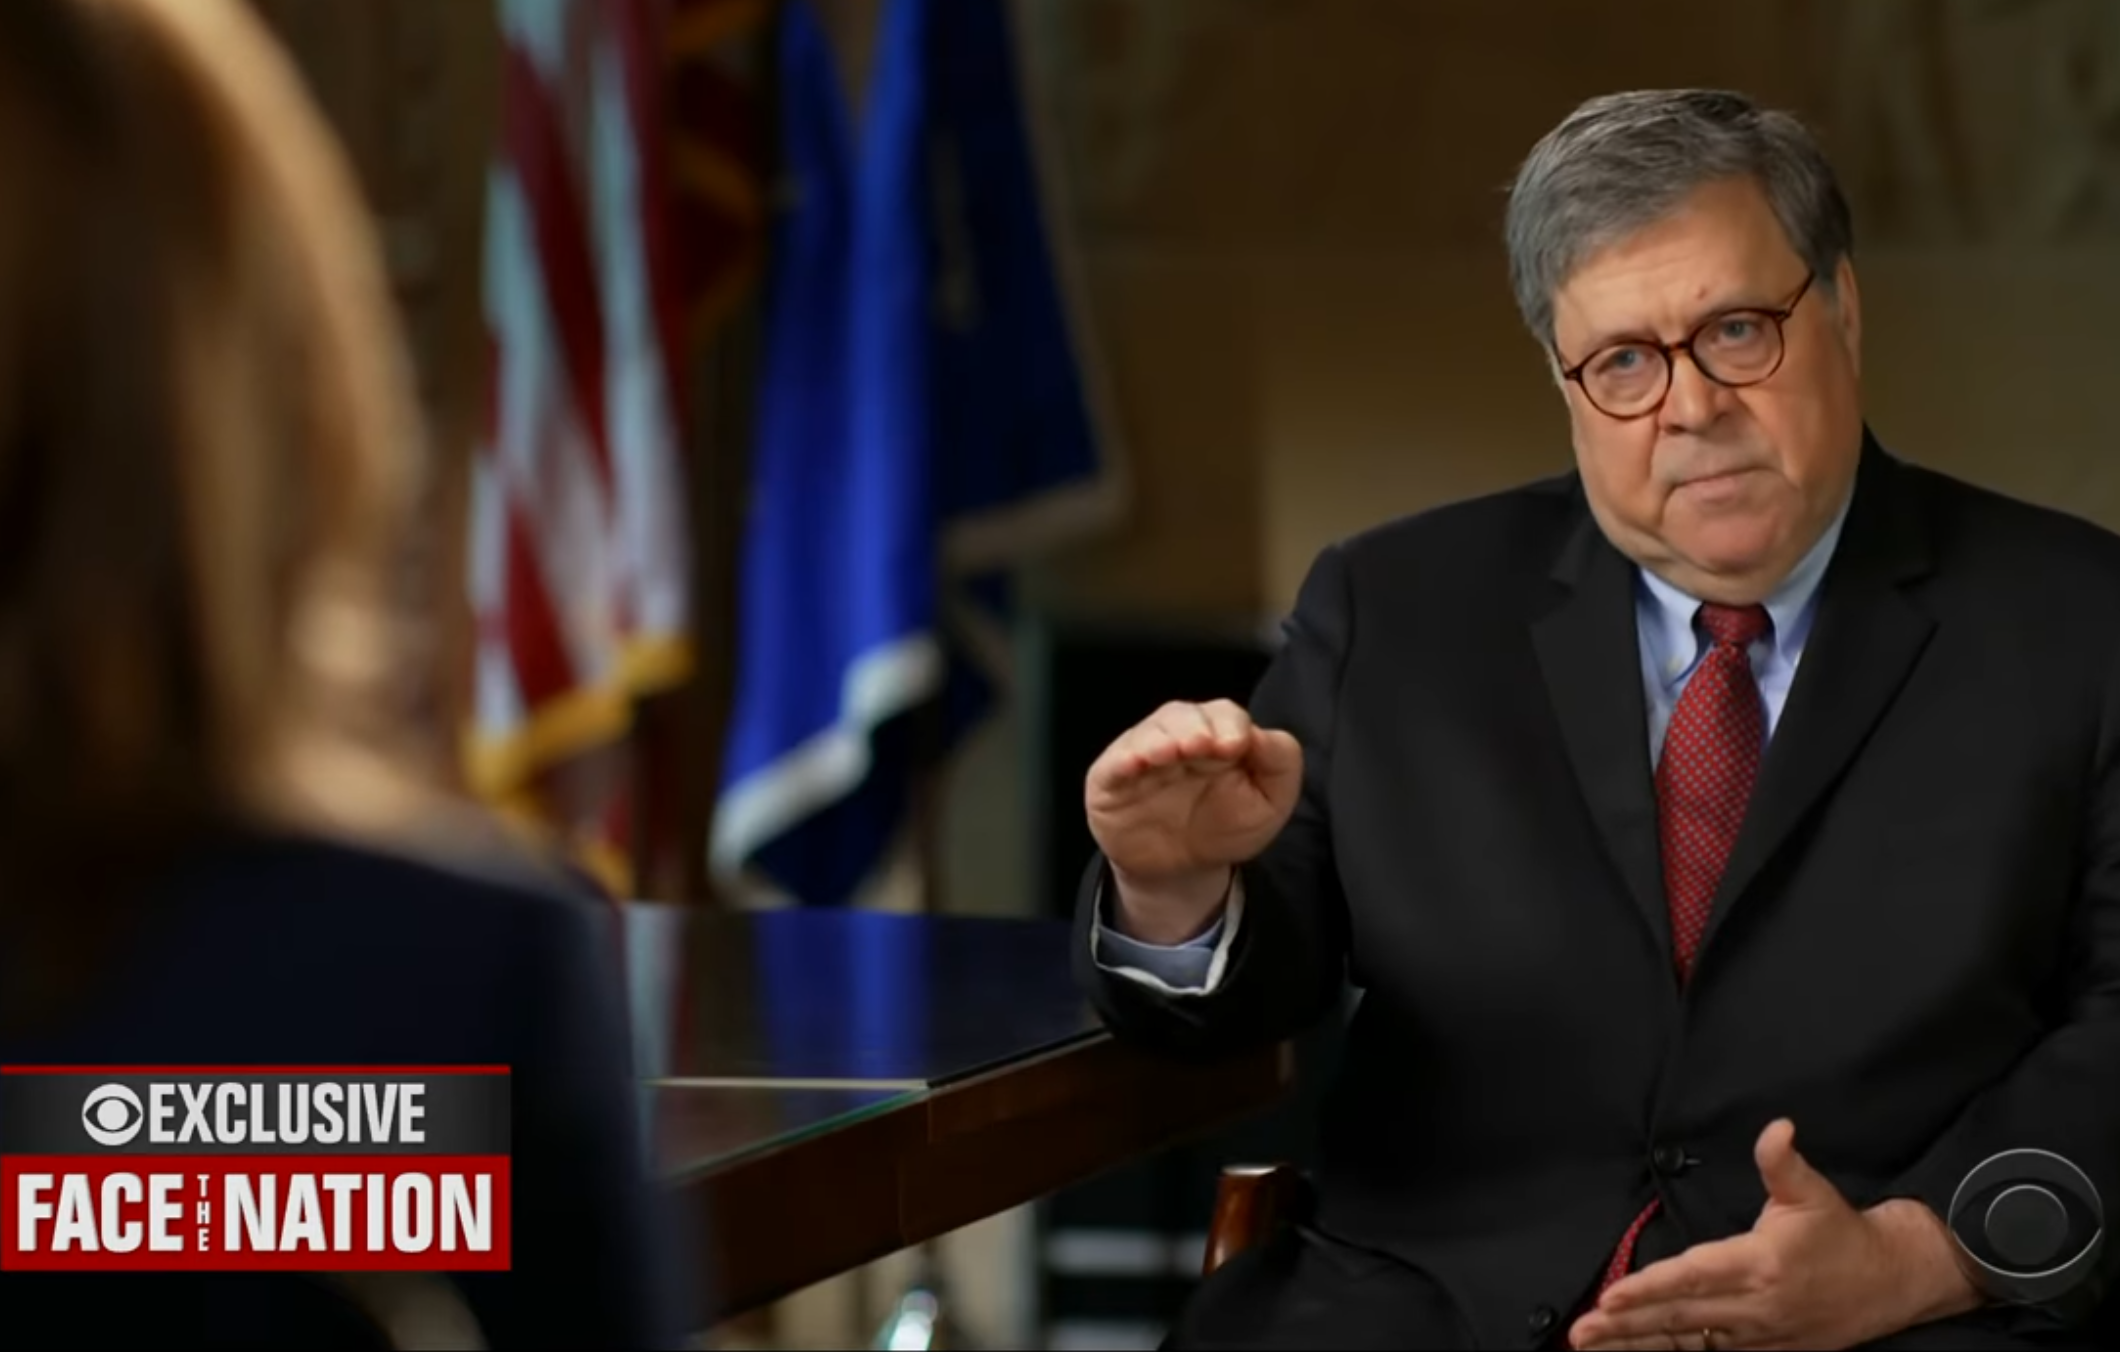 CBS Deceptively Edits Barr Interview, Leaving Out Key Details On Violent Riots, Police Oversight